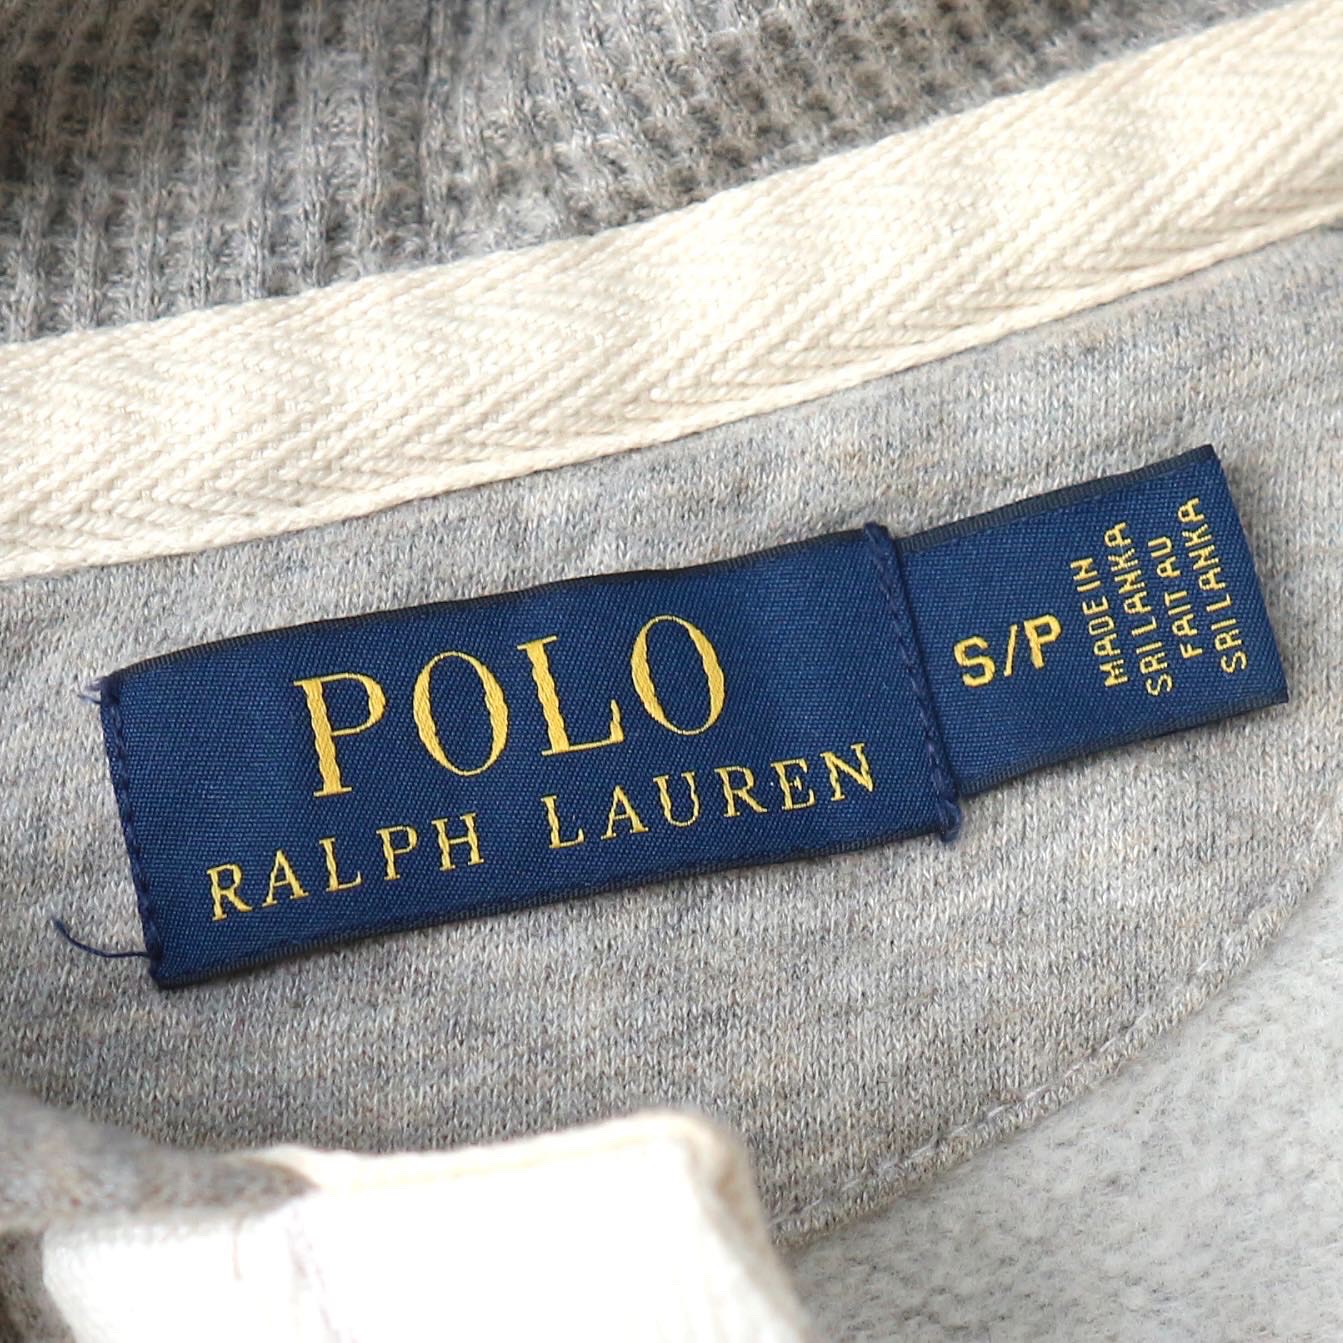 Polo by Ralph Lauren Hoodie Size S